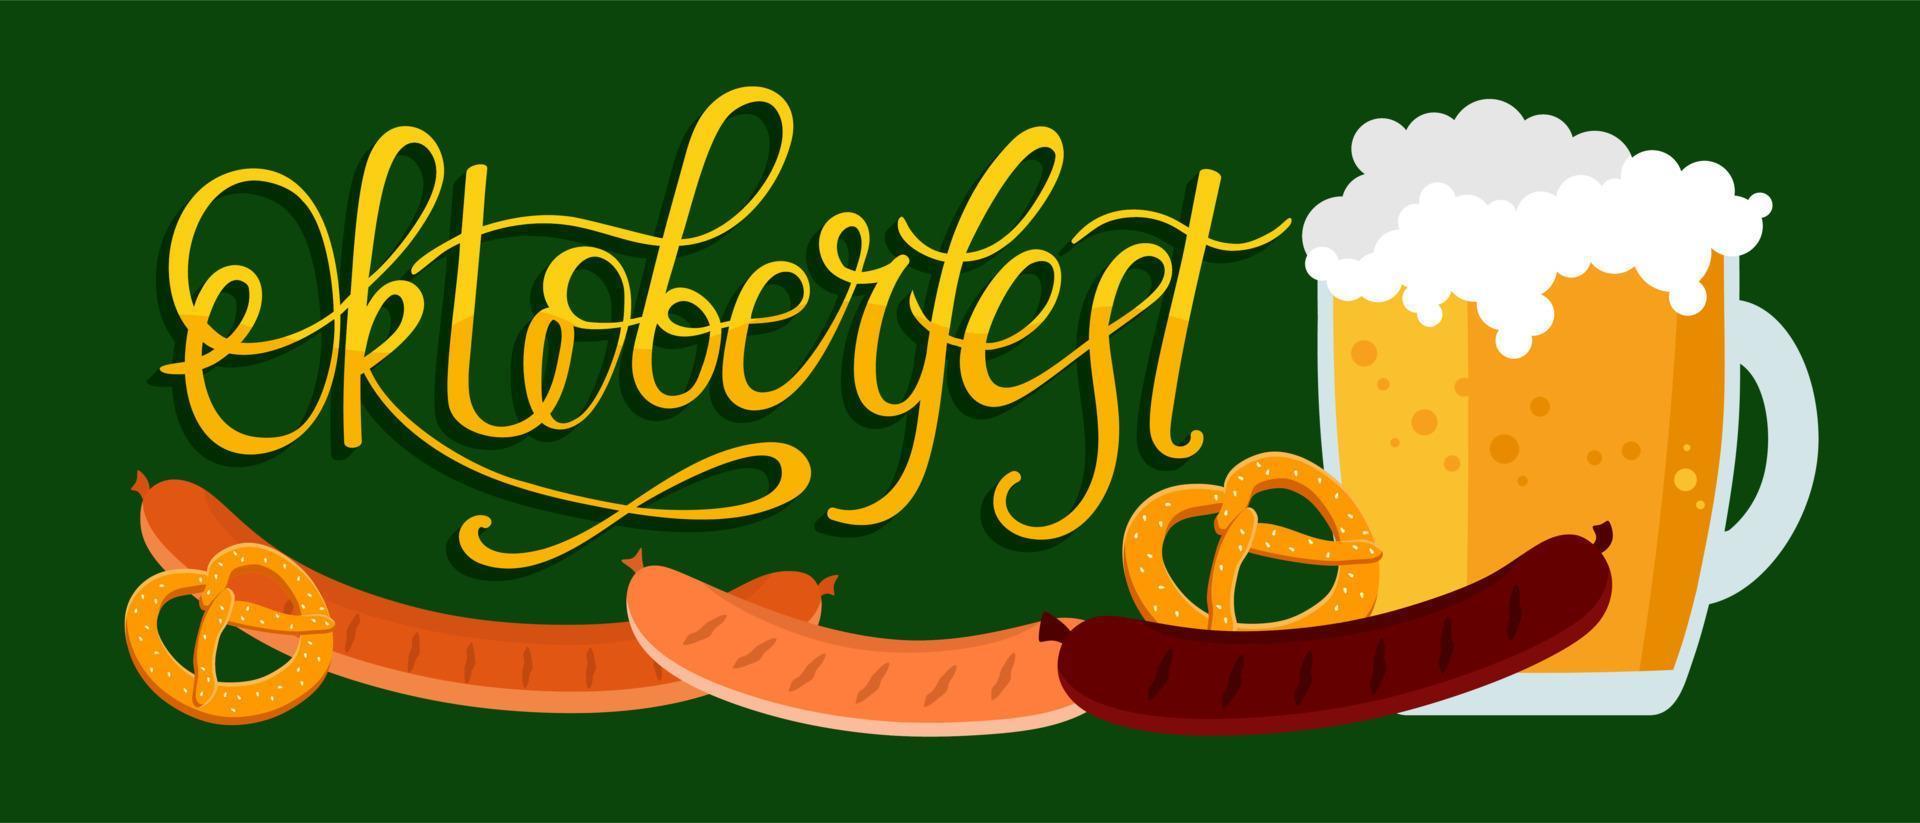 Oktoberfest banner. Handwritten inscription with the image of a beer mug with foam, pretzel and grilled sausage. vector